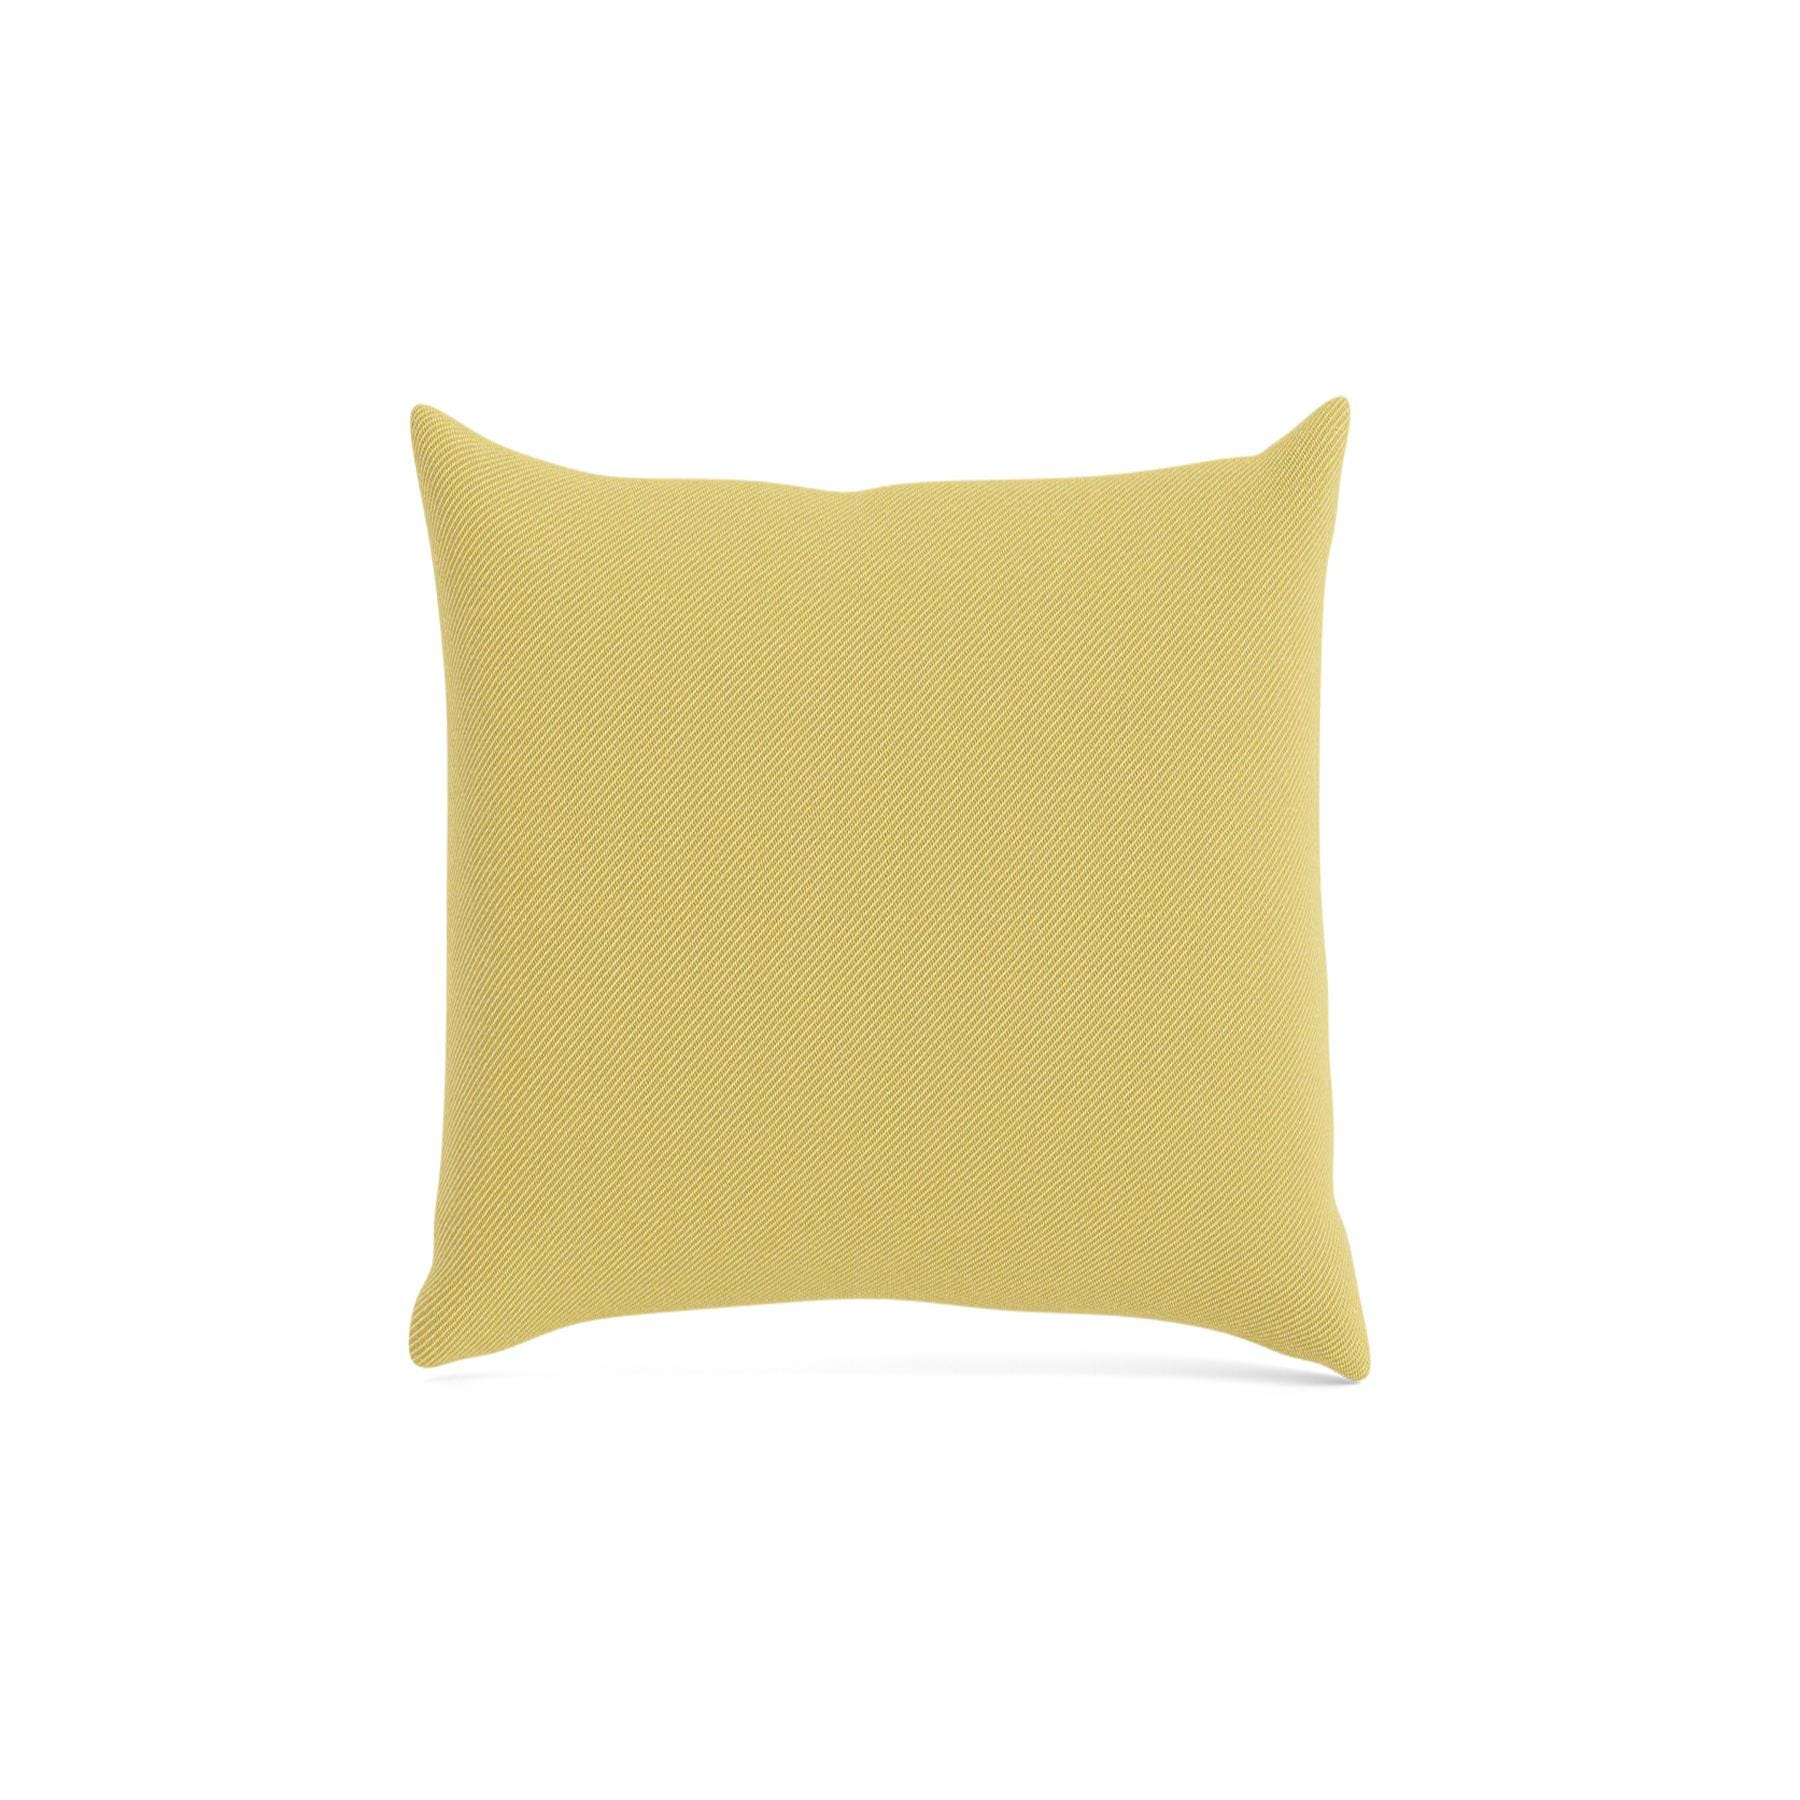 Make Nordic Pillow 40cmx40cm Twill Weave 430 Down And Fibers Yellow